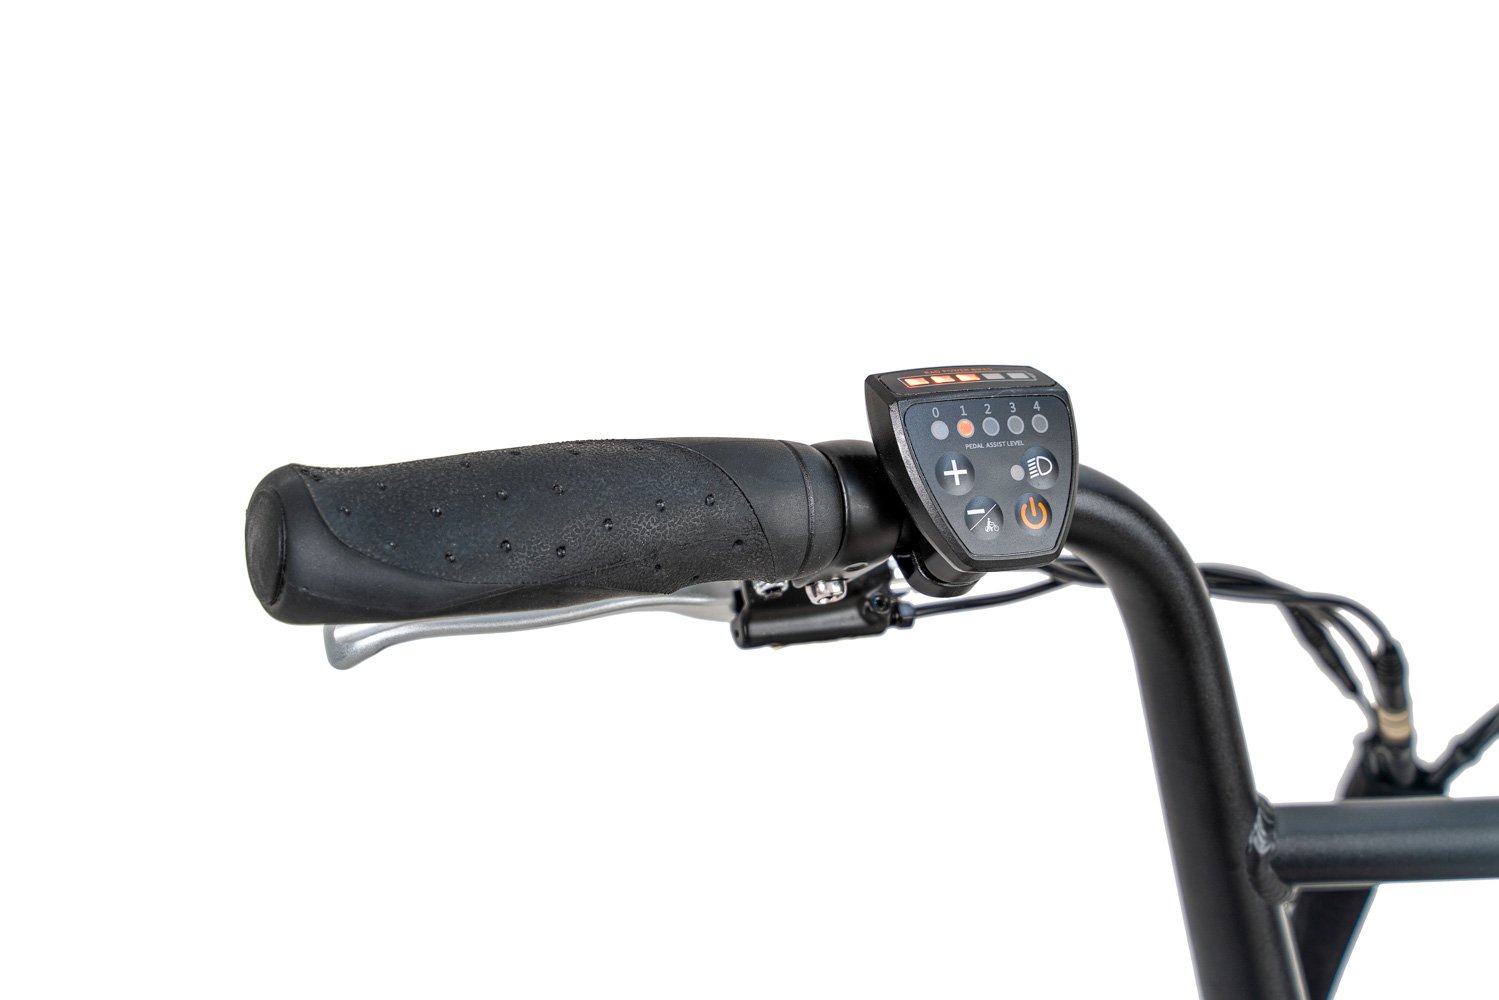 A product image of the Radrunner 2 electric longtail cargo bike from Rad Power Bikes, which is available to hire from LeaseBike. The photo shows the details of the power assist controls on the left side of the handlebar.